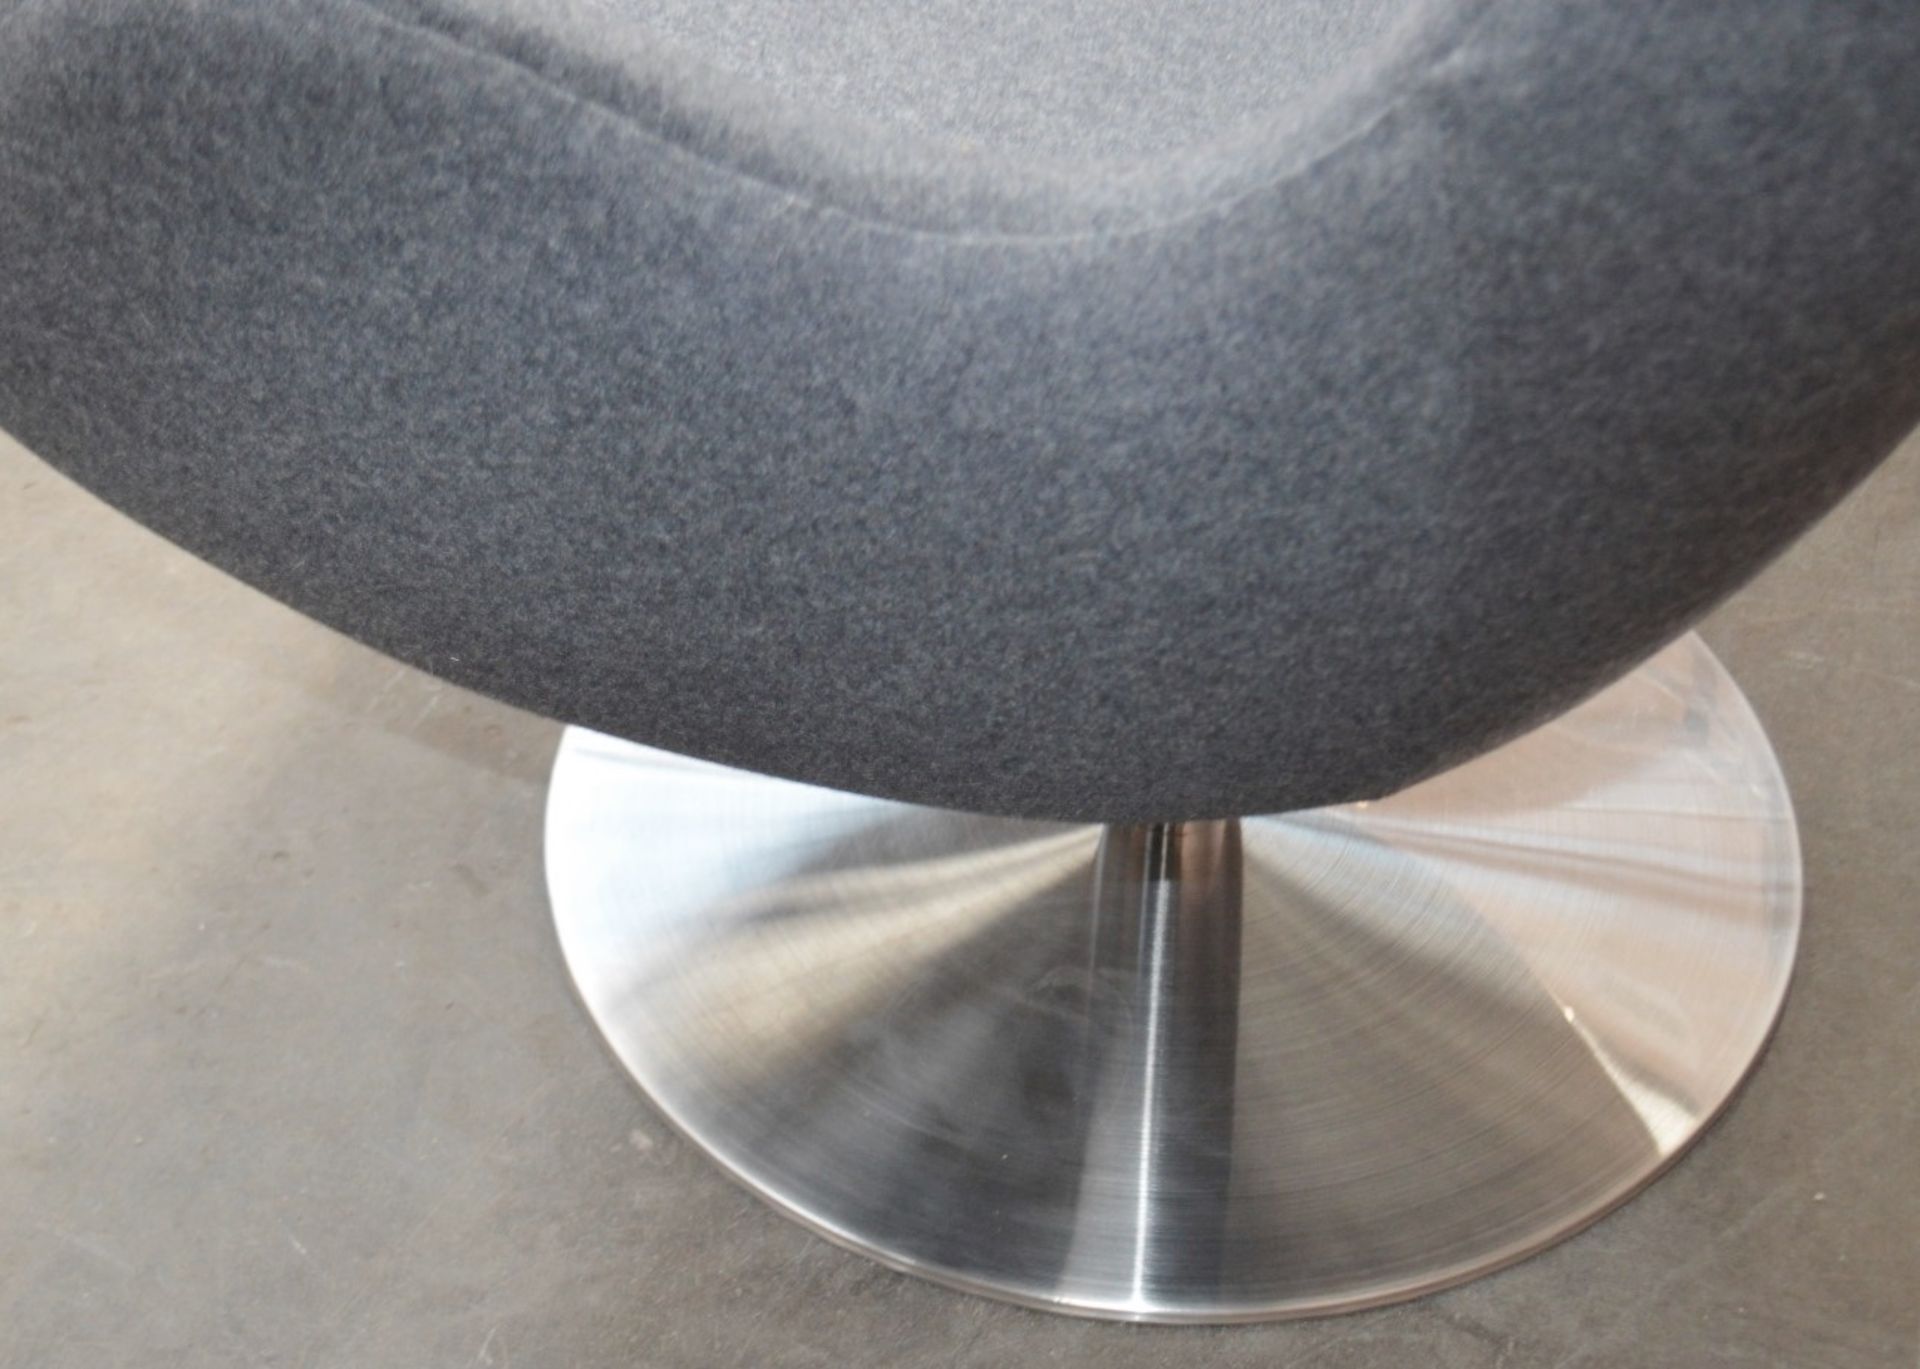 1 x Arne Jacobsen-Inspired Egg Lounge Chair - Upholstered In Grey Cashmere With Steel Base - Image 11 of 13